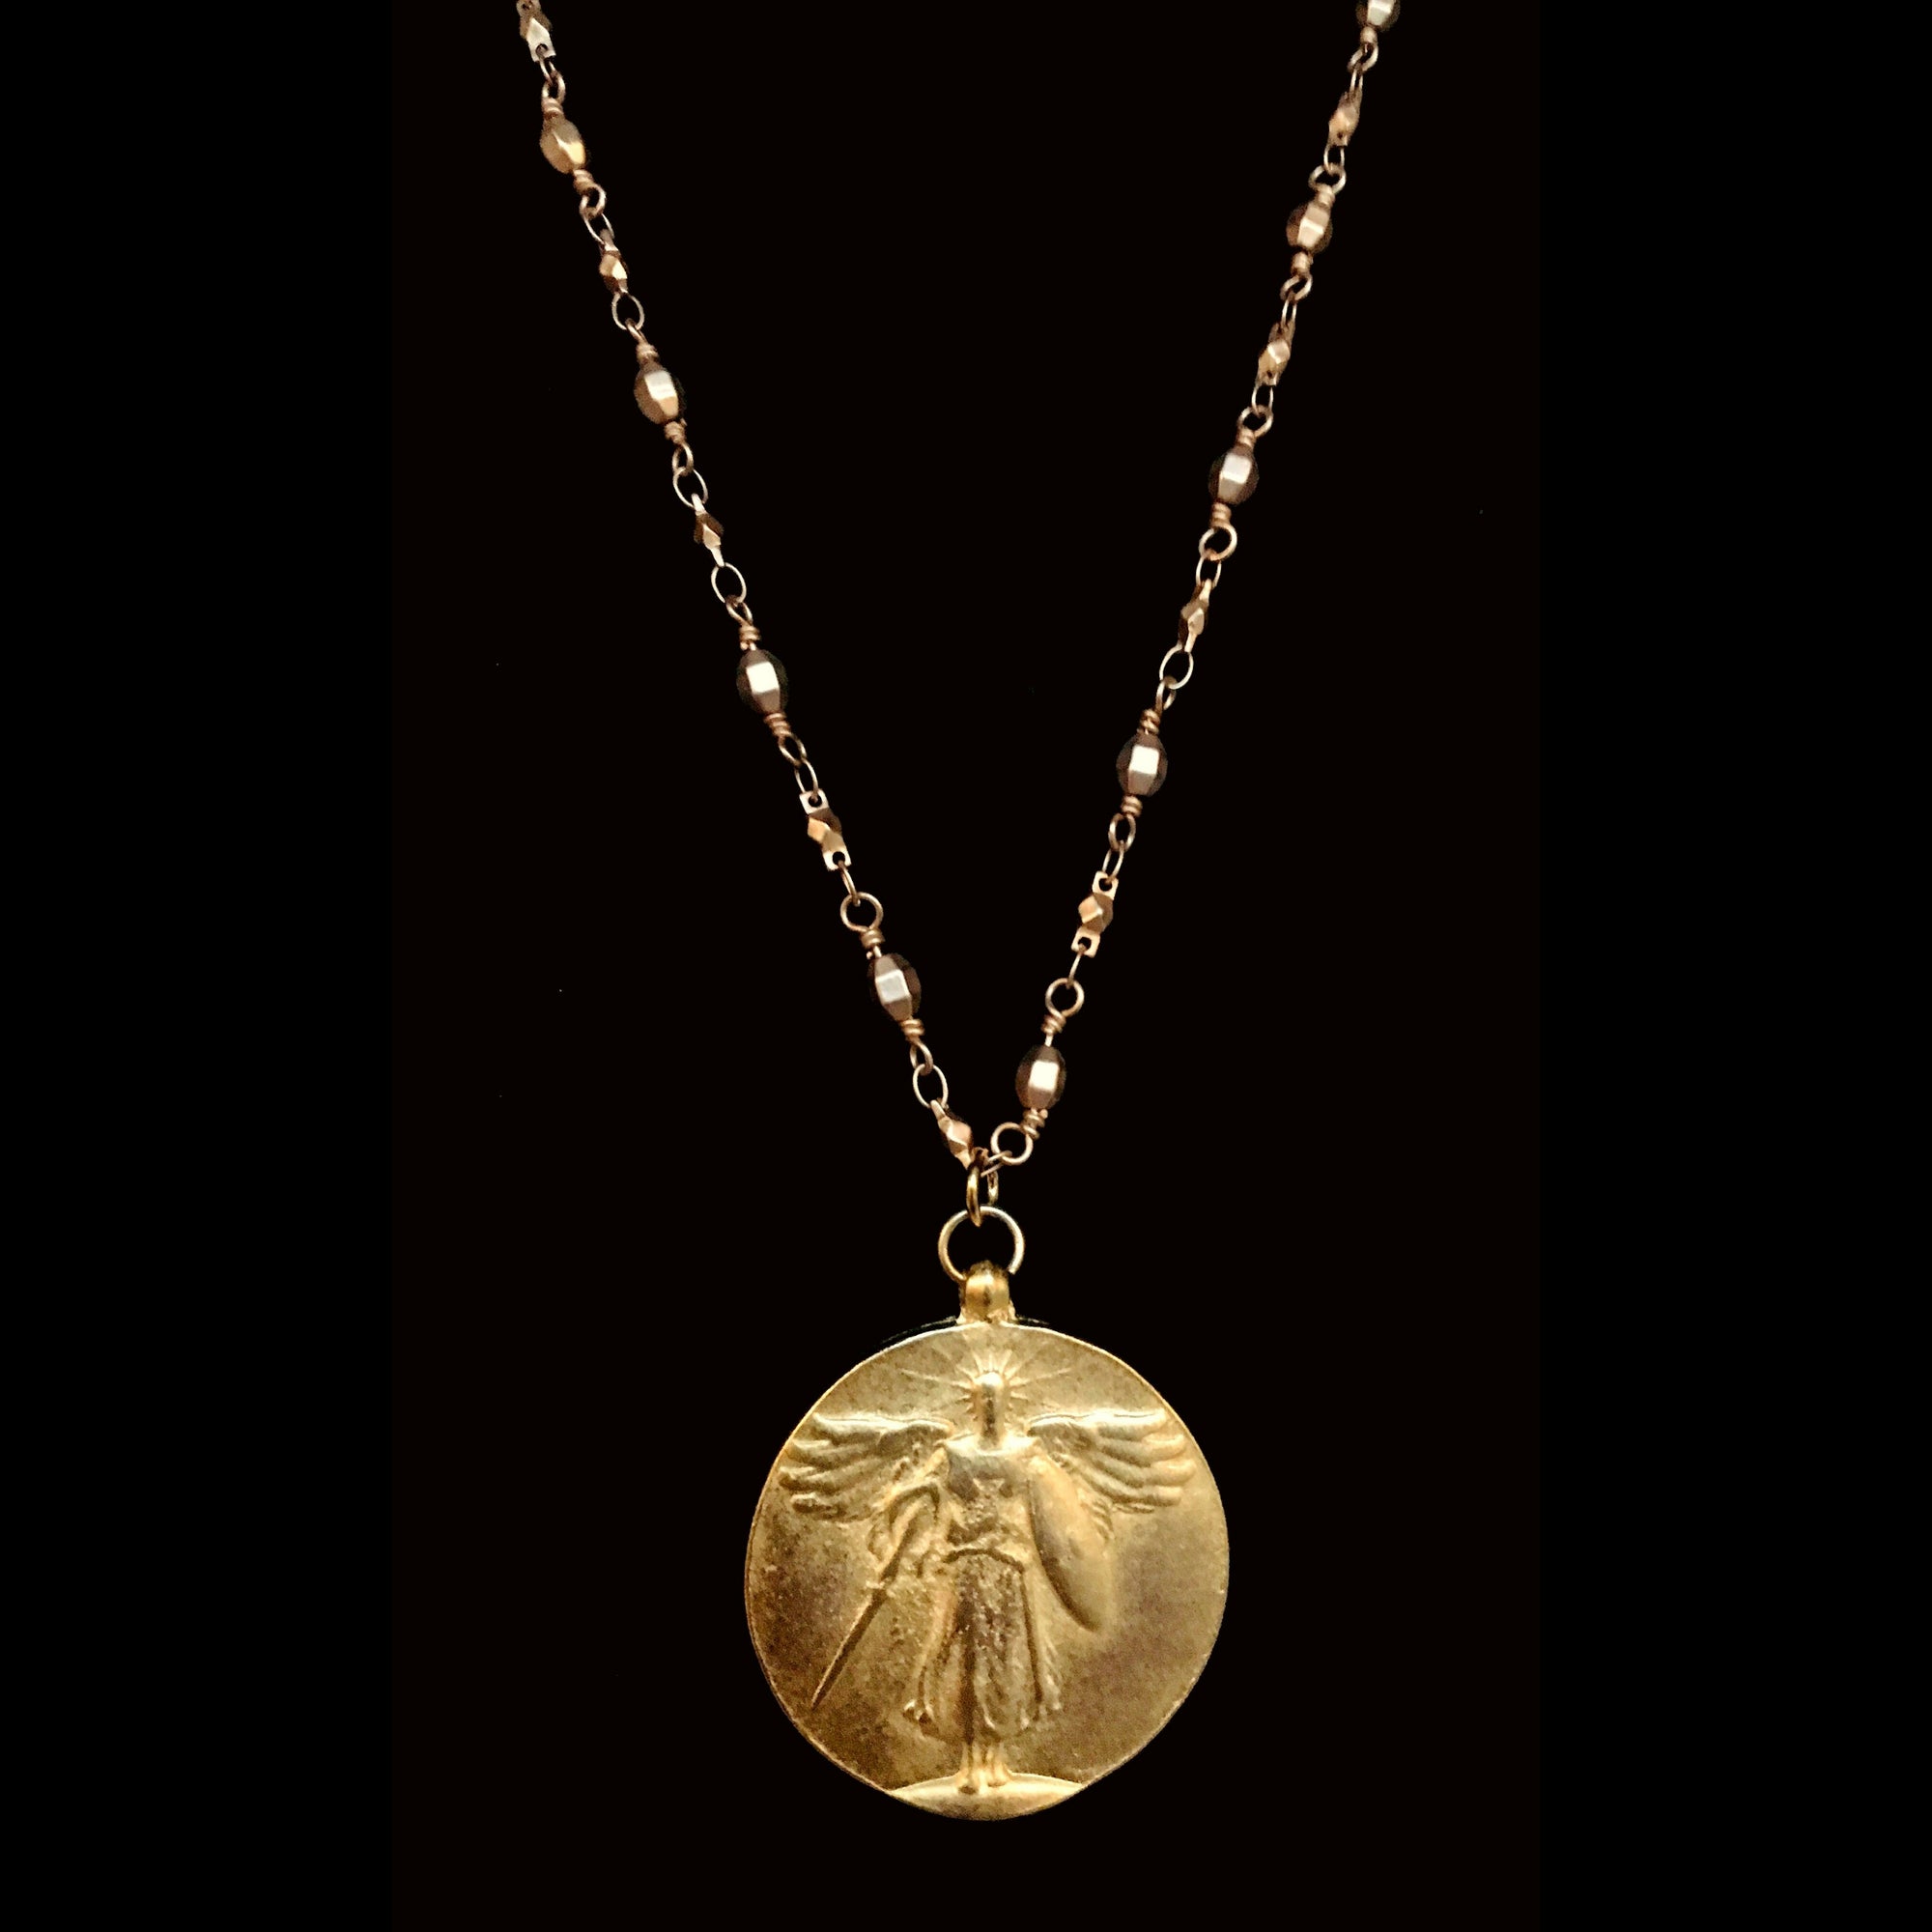 St. Michael Victory Medallion Chain Necklace by Whispering Goddess - Gold